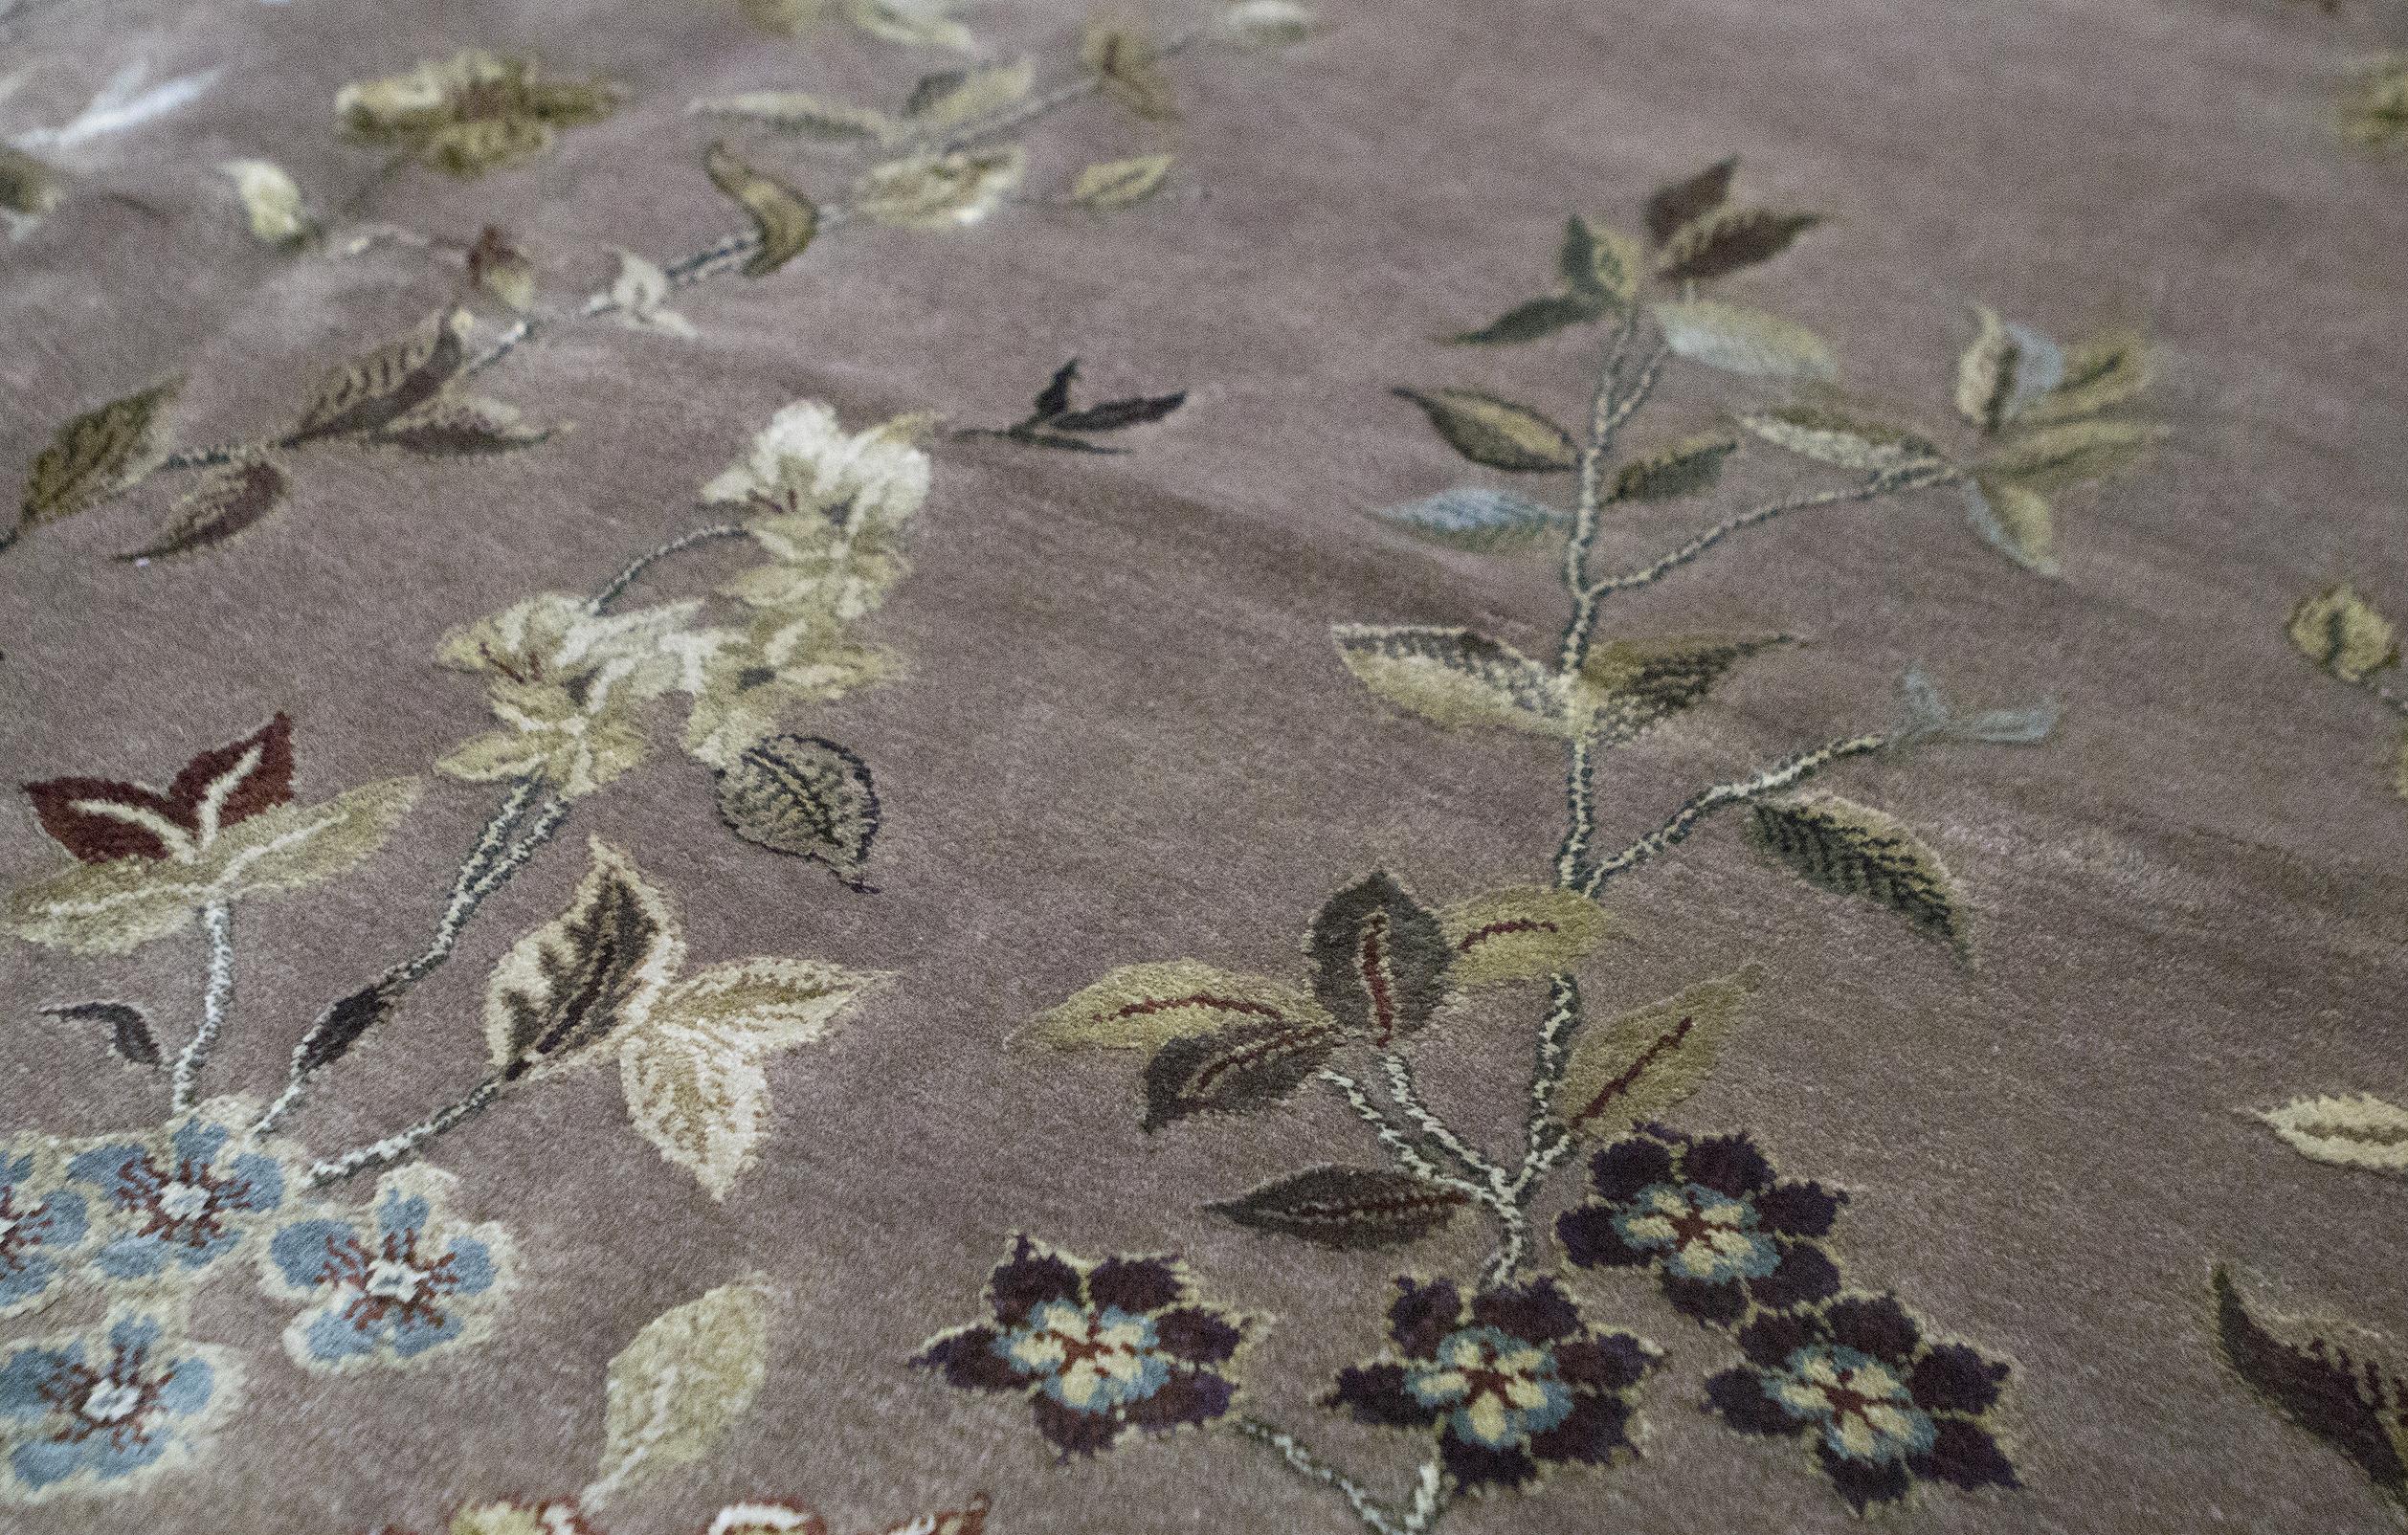 A luxurious combination of 40% soft silks together with 60% of the finest of Wools come together in these hand woven rugs. Woven by master weavers in India the designs are current and contemporary floral patterns. The transitional nature of these